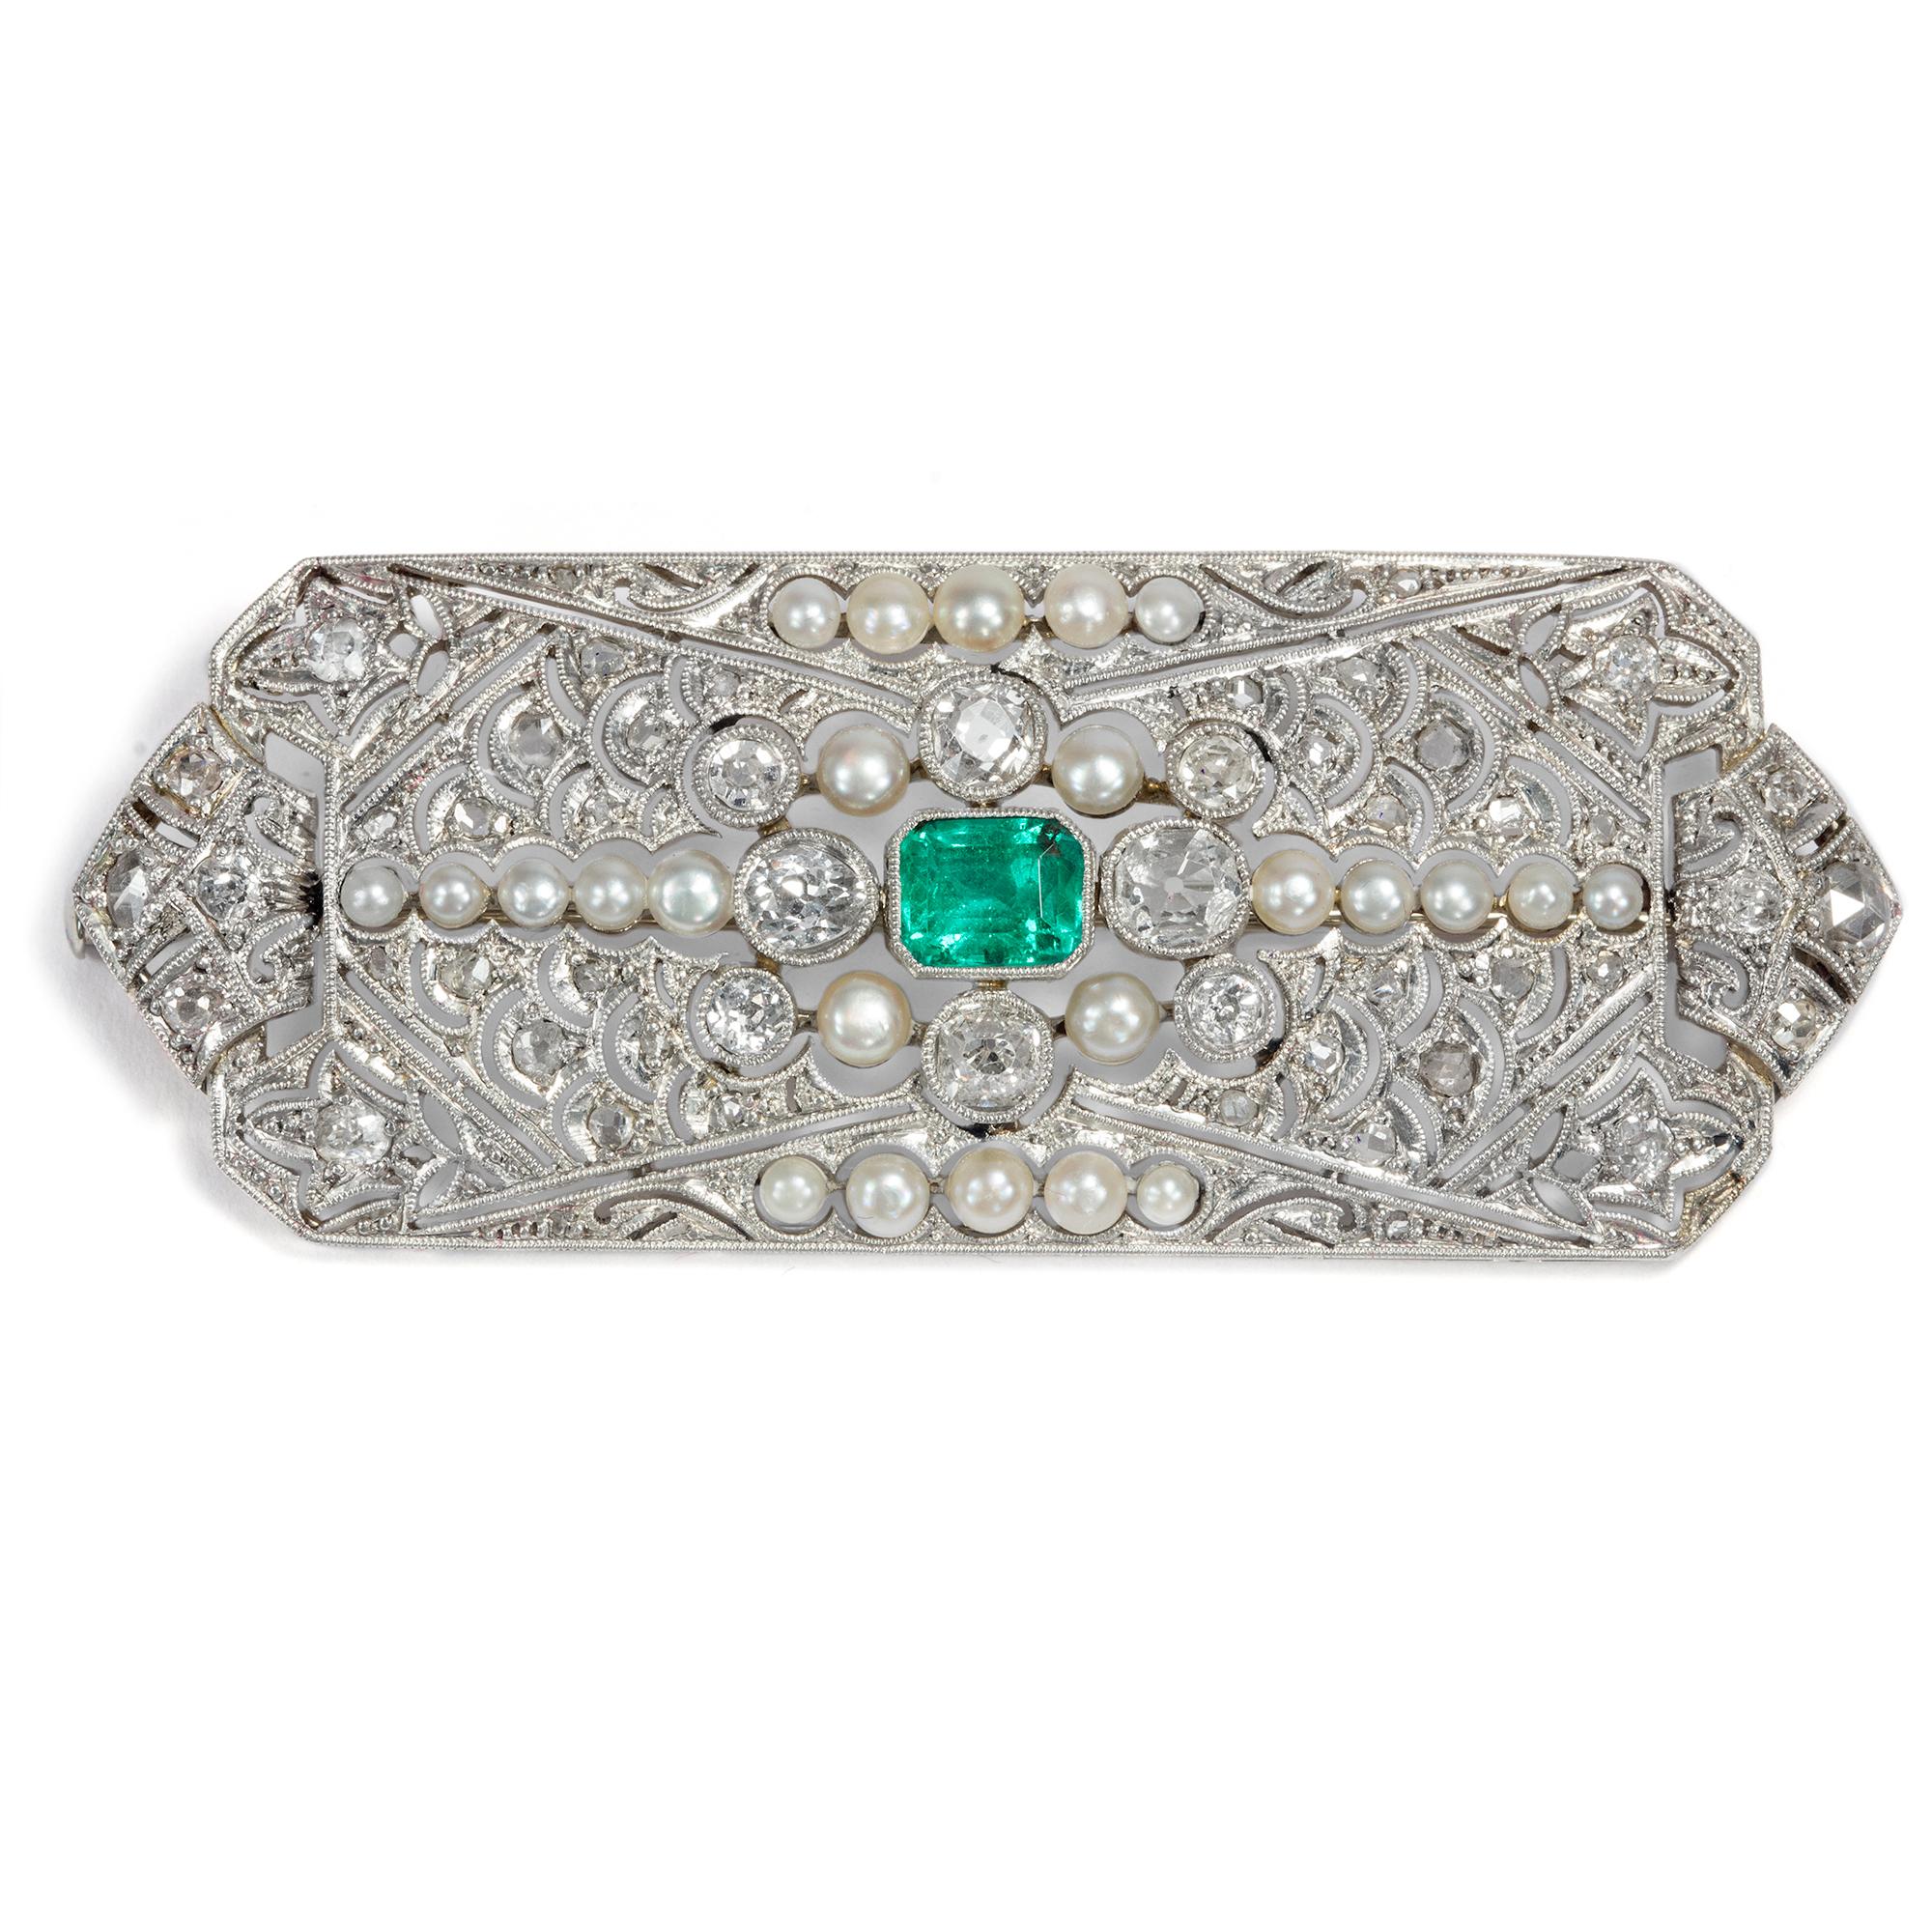 One of the things about antique jewellery that never ceases to amaze us is the thought that the pieces we offer were around when events of political or cultural significance took place. In the 1920s, when this brooch was made, the role of women